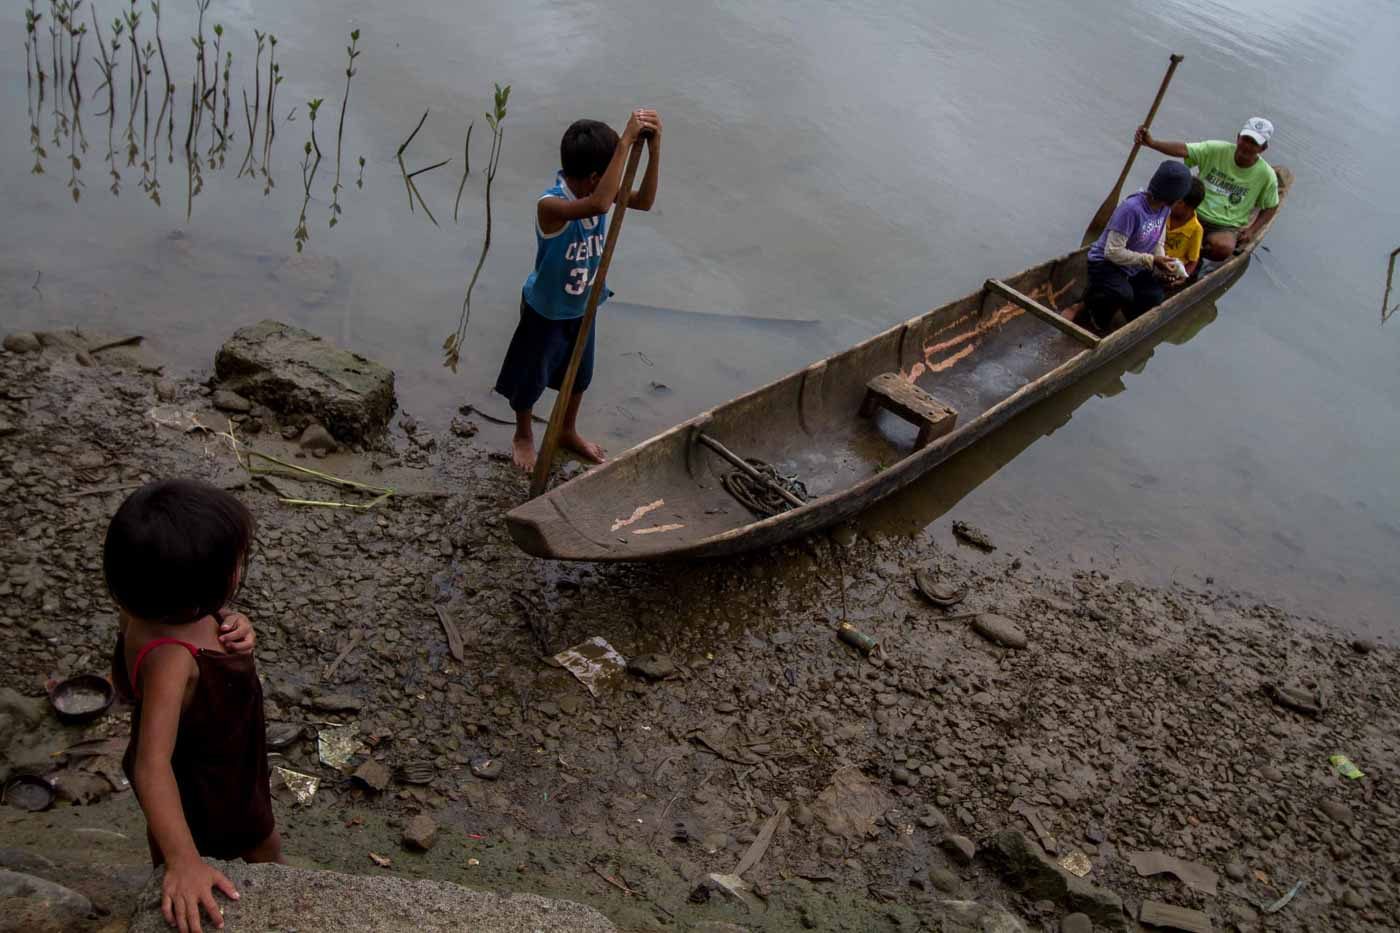 TRANSPORTATION. Child laborers in an underwater mining pit take a boat ride to reach the center of the river. Photo by Mark Saludes/Rappler